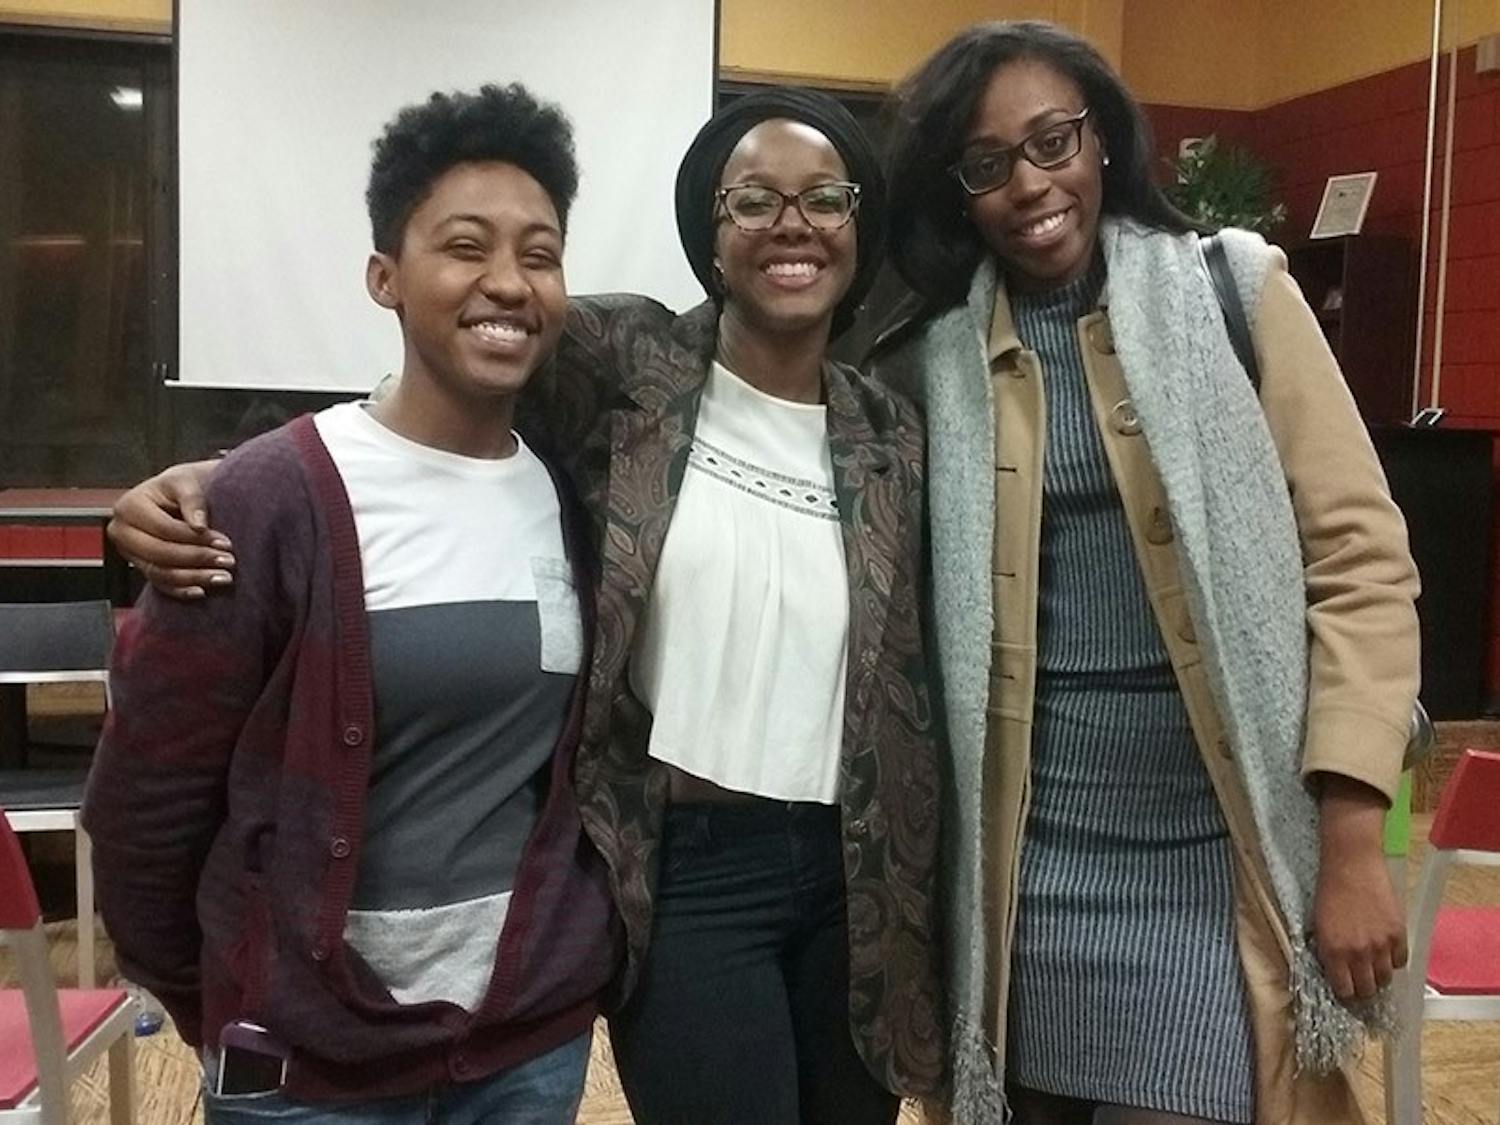 UB graduate student Aisha Abdelmula’s (pictured middle) "Black Lives Matter" film explores the lives of black students on campus. Afiya Grant (left) and Christina Dunn (right) are two participants featured in the film.&nbsp;The “Black Lives Matter” movement rallies against violence and injustice toward black people.